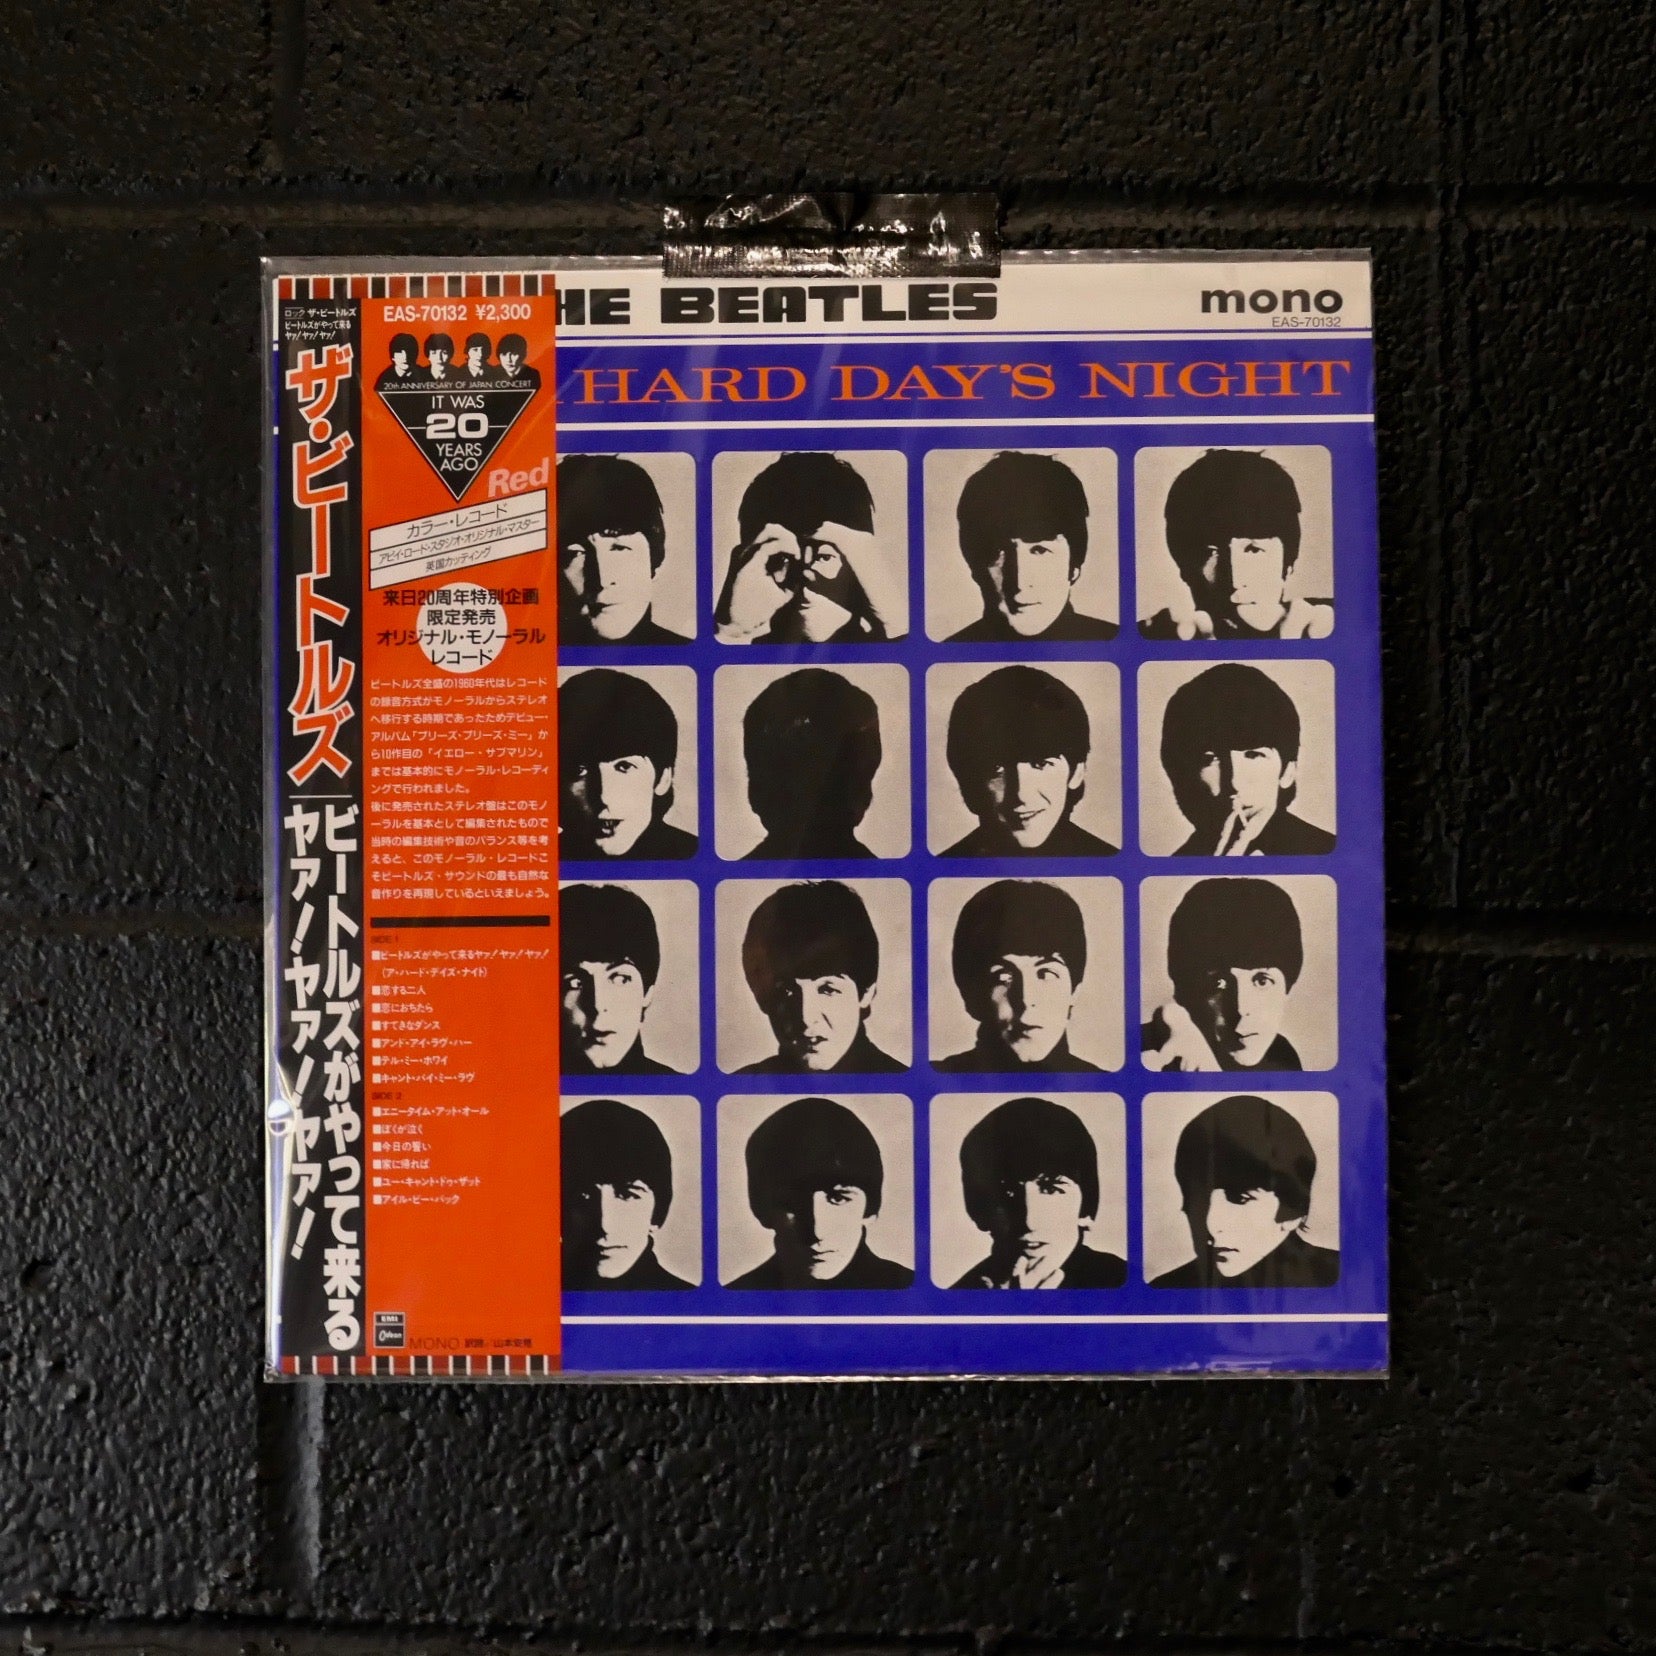 Beatles - A Hard Day's Night - Red vinyl Mono (Japan LP with OBI)